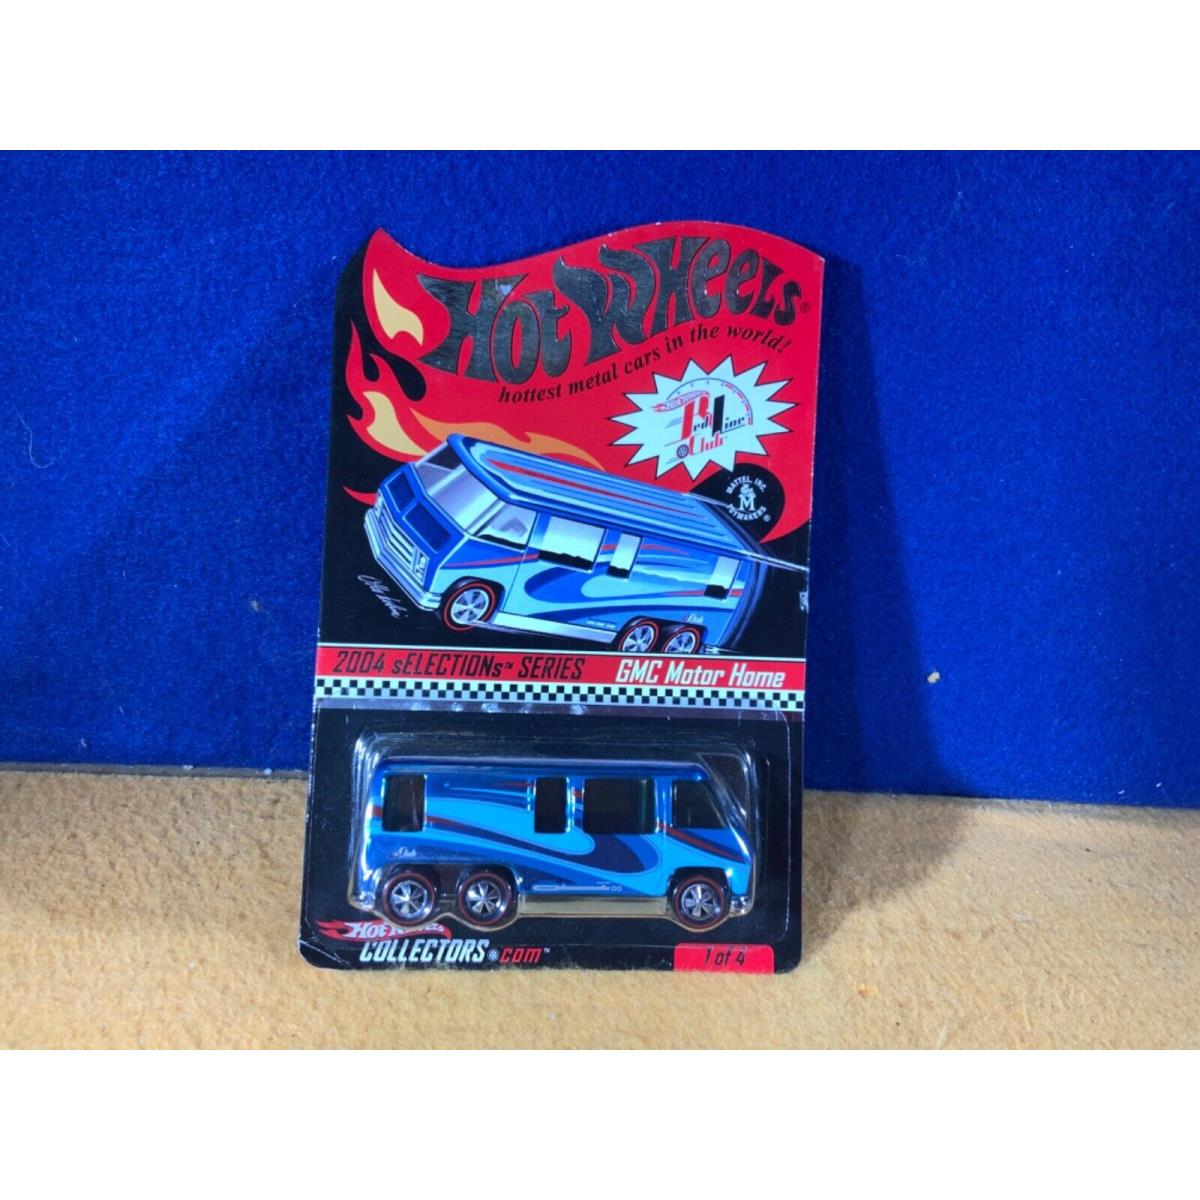 L9-41 Hot Wheels Red Line Club - Gmc Motor Home - 2004 Selection Series